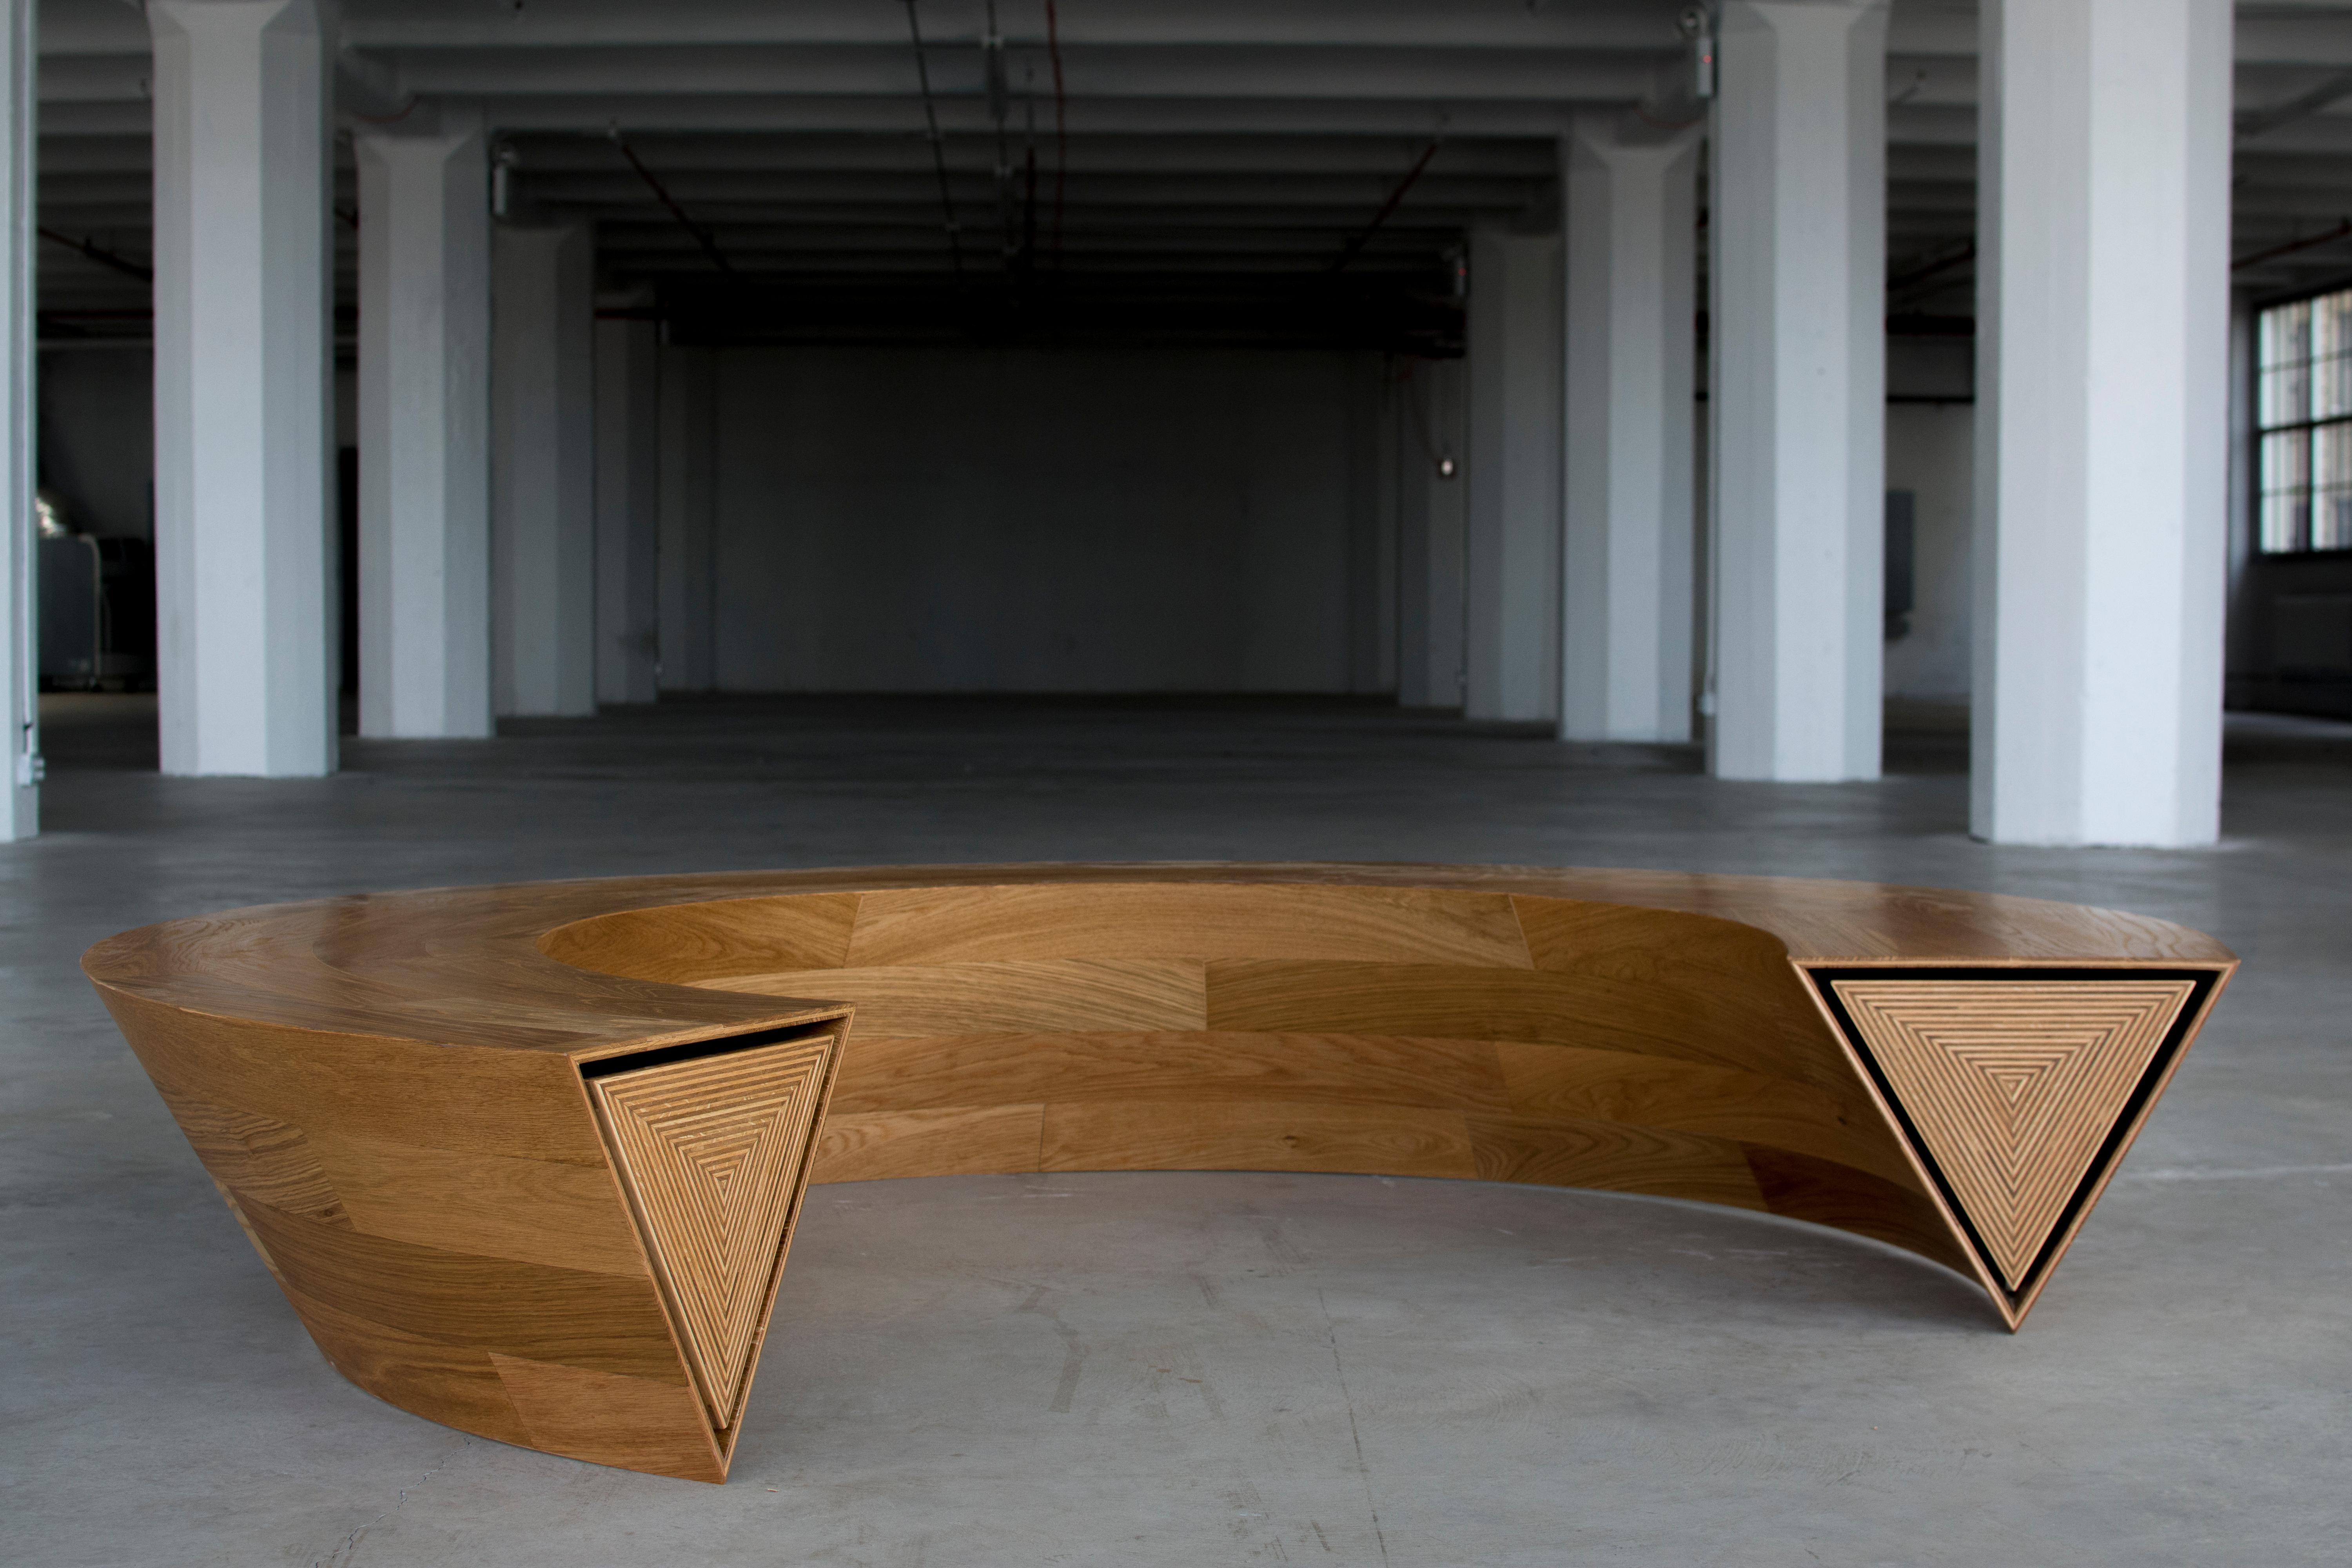 Round & Round is a circular communal bench and storage unit that is balanced on one single line. Though appearing to be a solid mass, as one end of the bench is pushed, the opposing side pops open revealing itself to be a continuous hidden drawer.